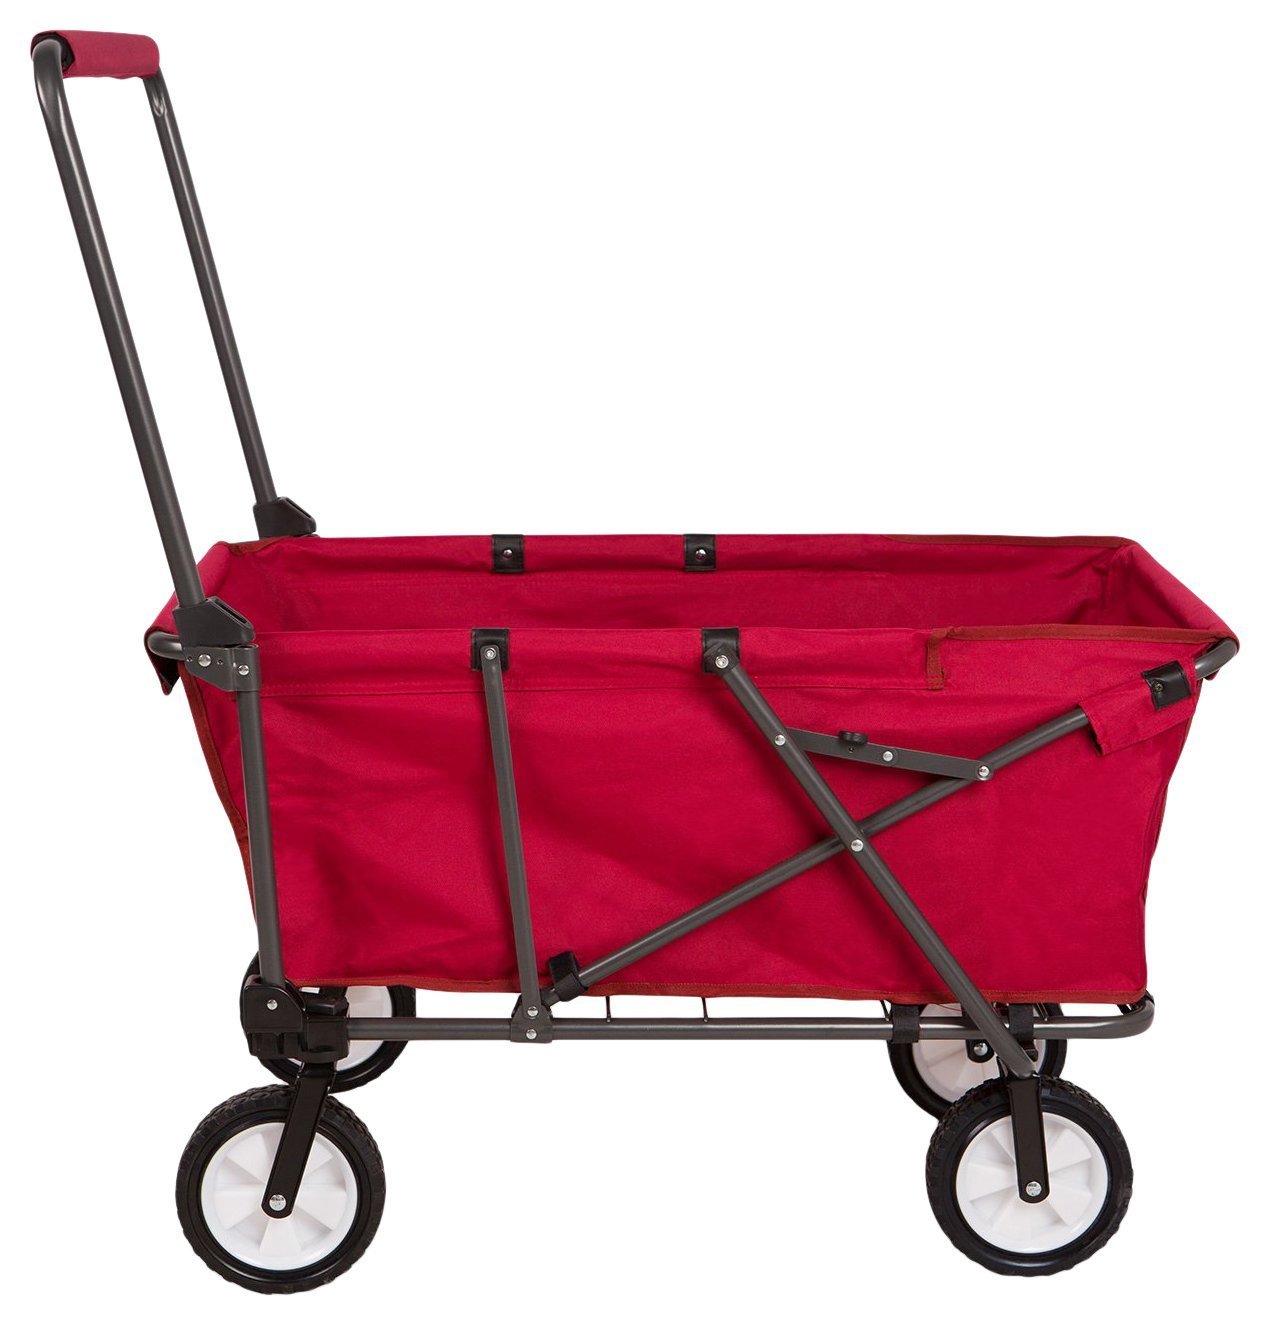 REDCAMP collapsible [All terrain Outdoor] wagon